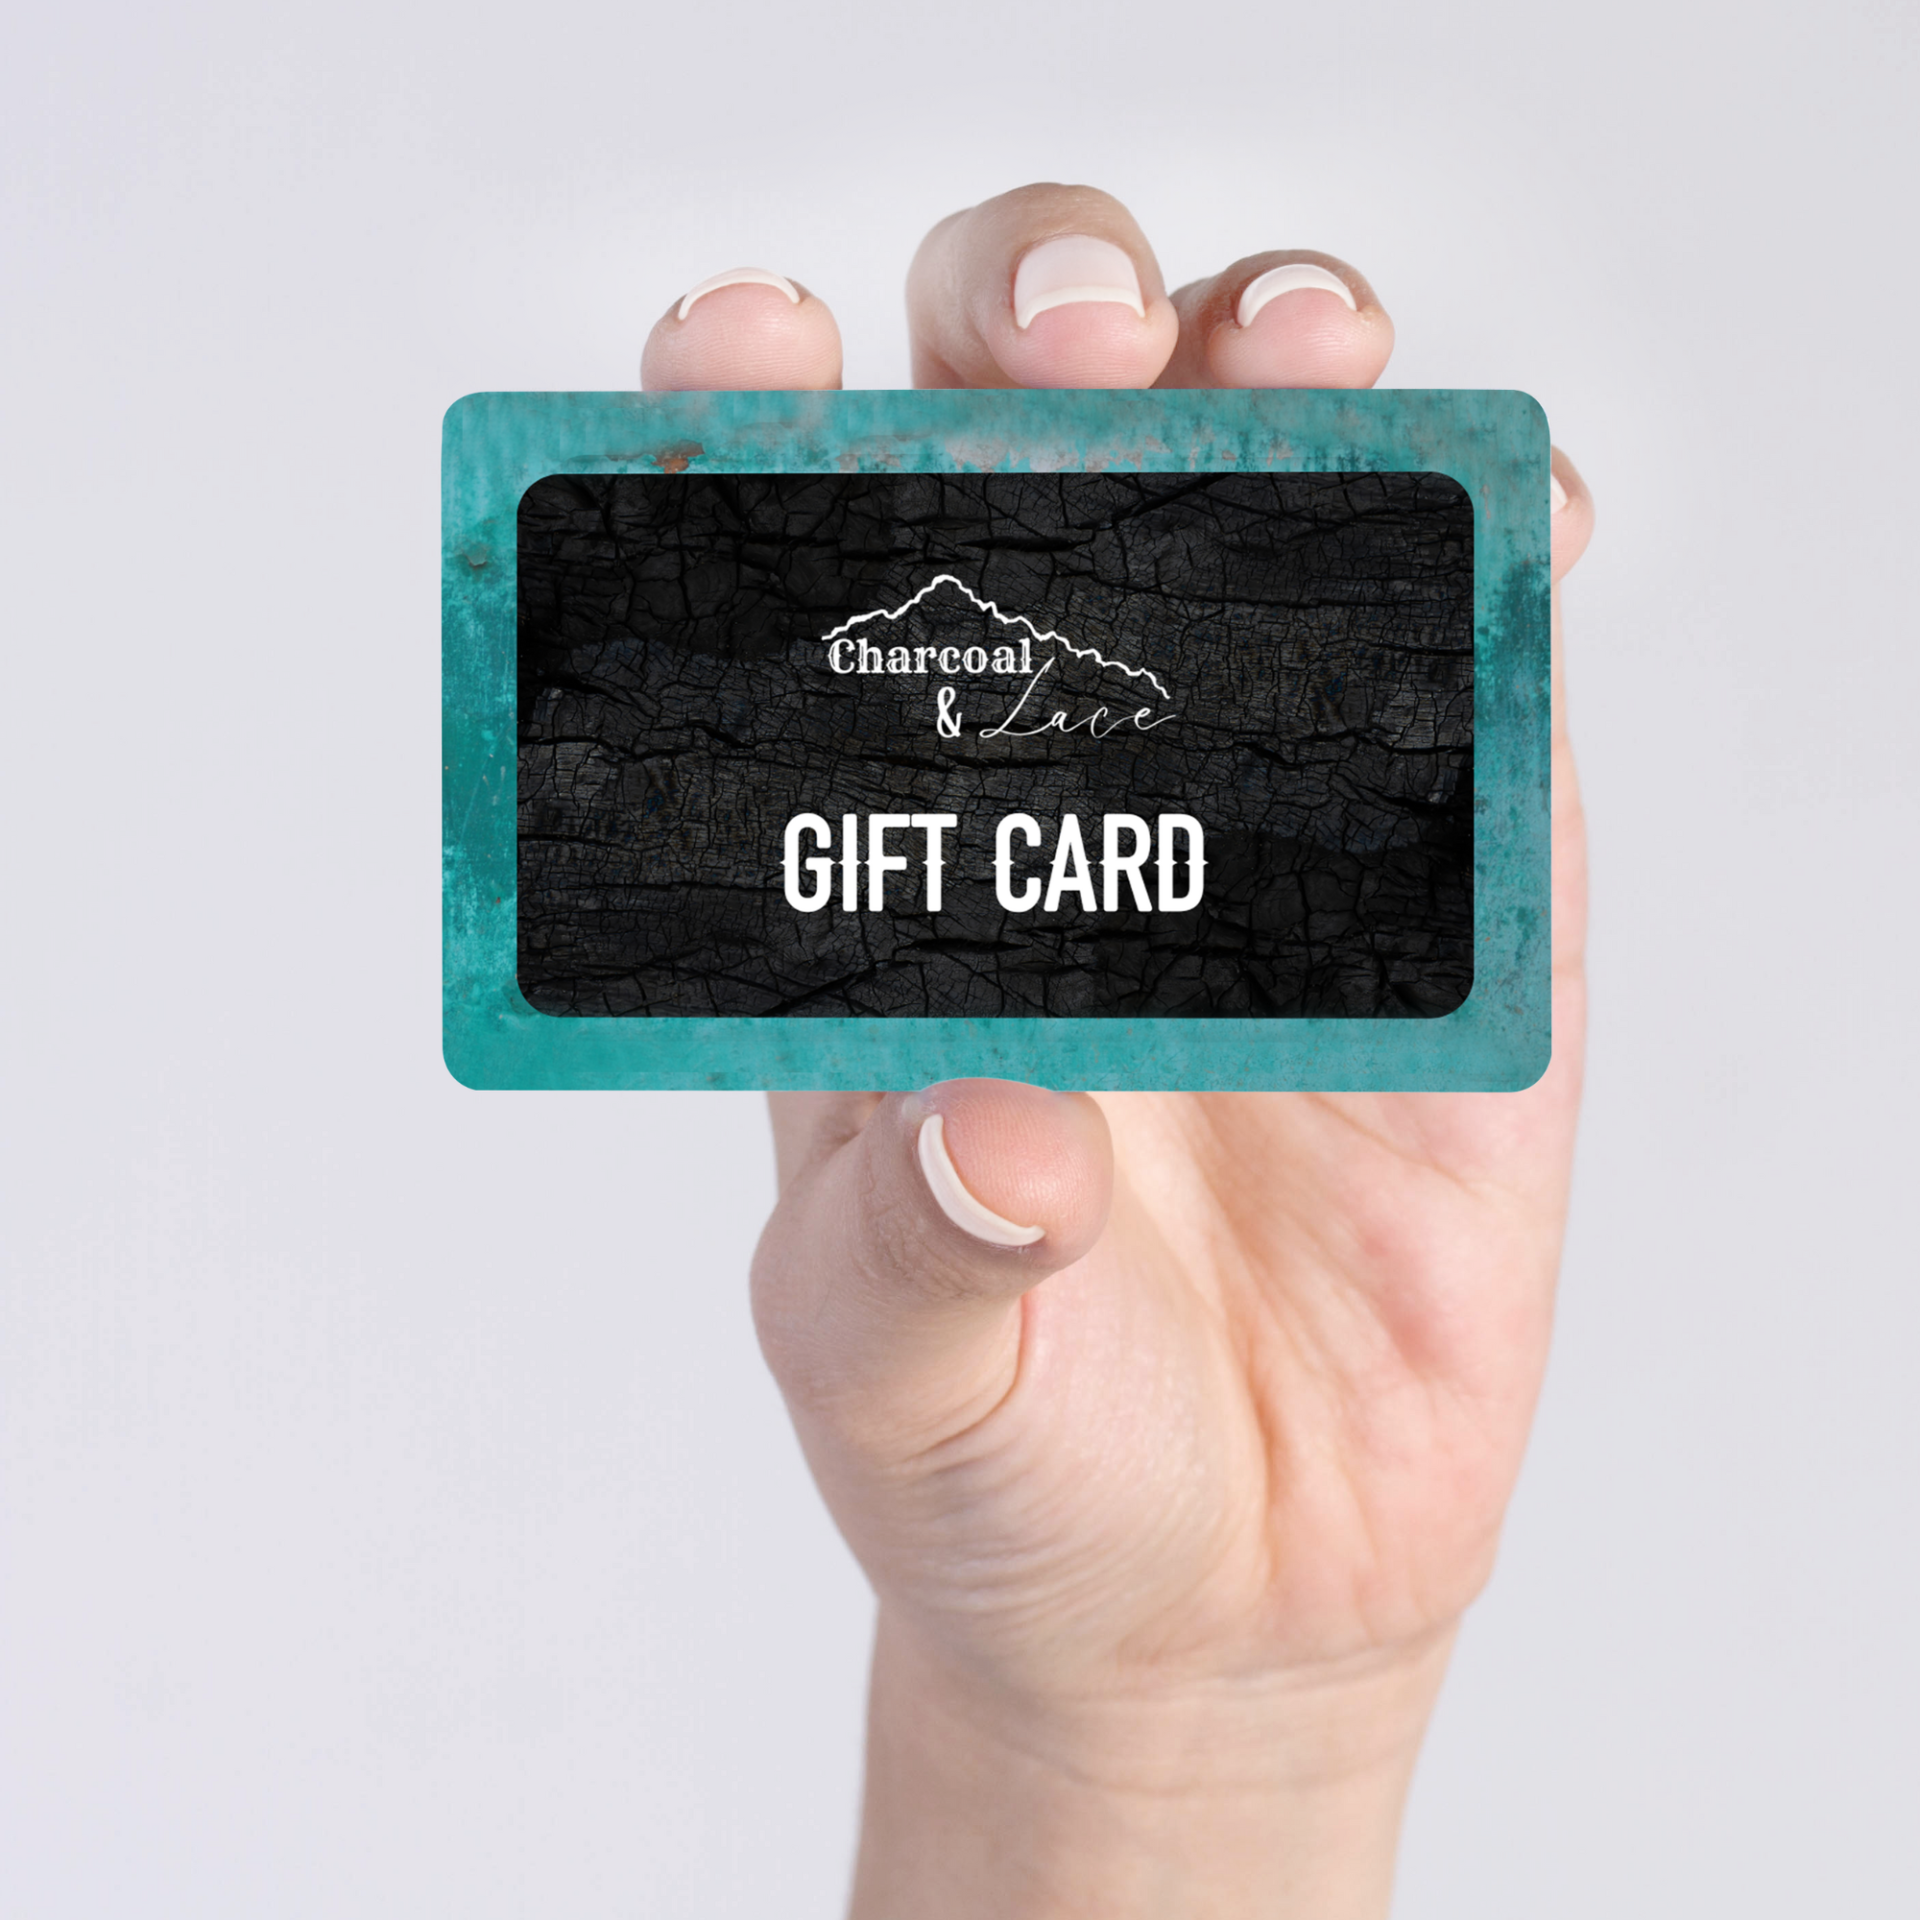 Charcoal & Lace Gift Card